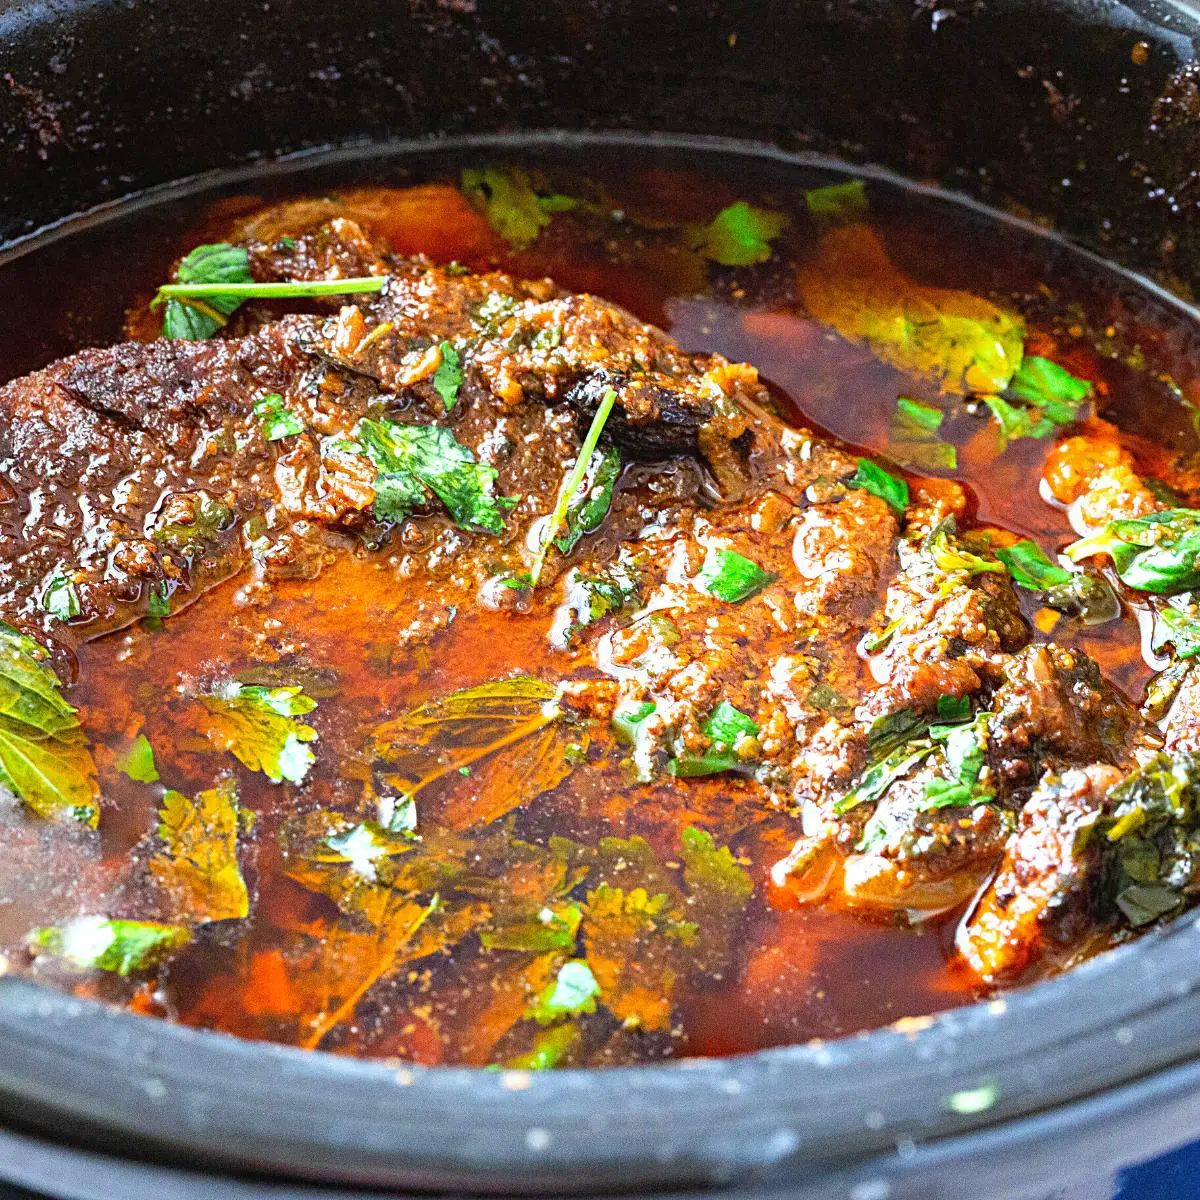 A slow cooker with beef shanks nihari curry.